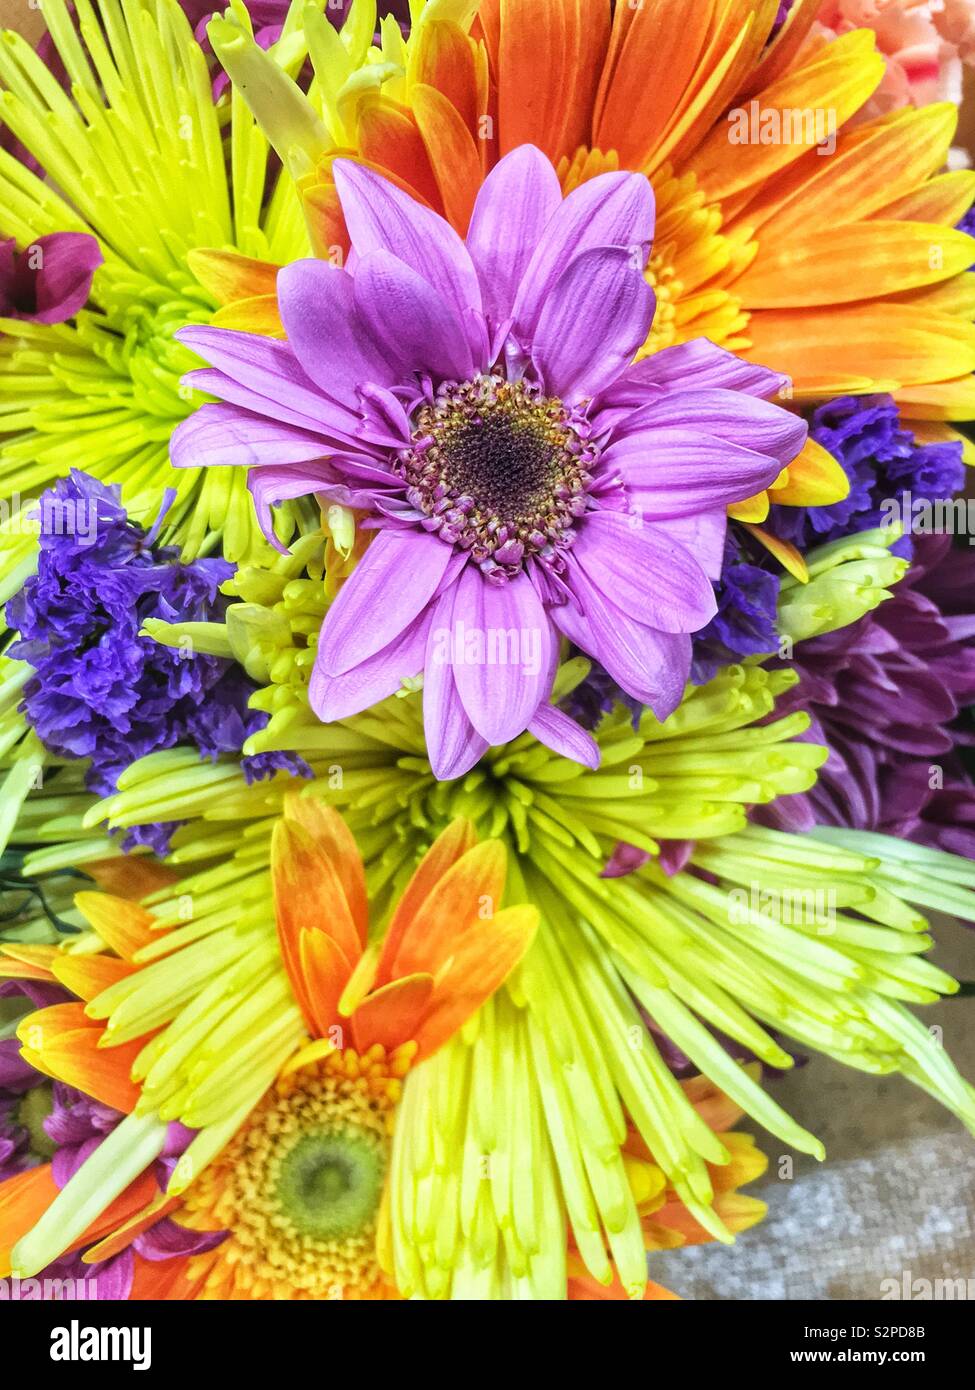 A fresh bouquet of a purple daisy, chrysanthemums, and brightly colored summer flowers. Stock Photo